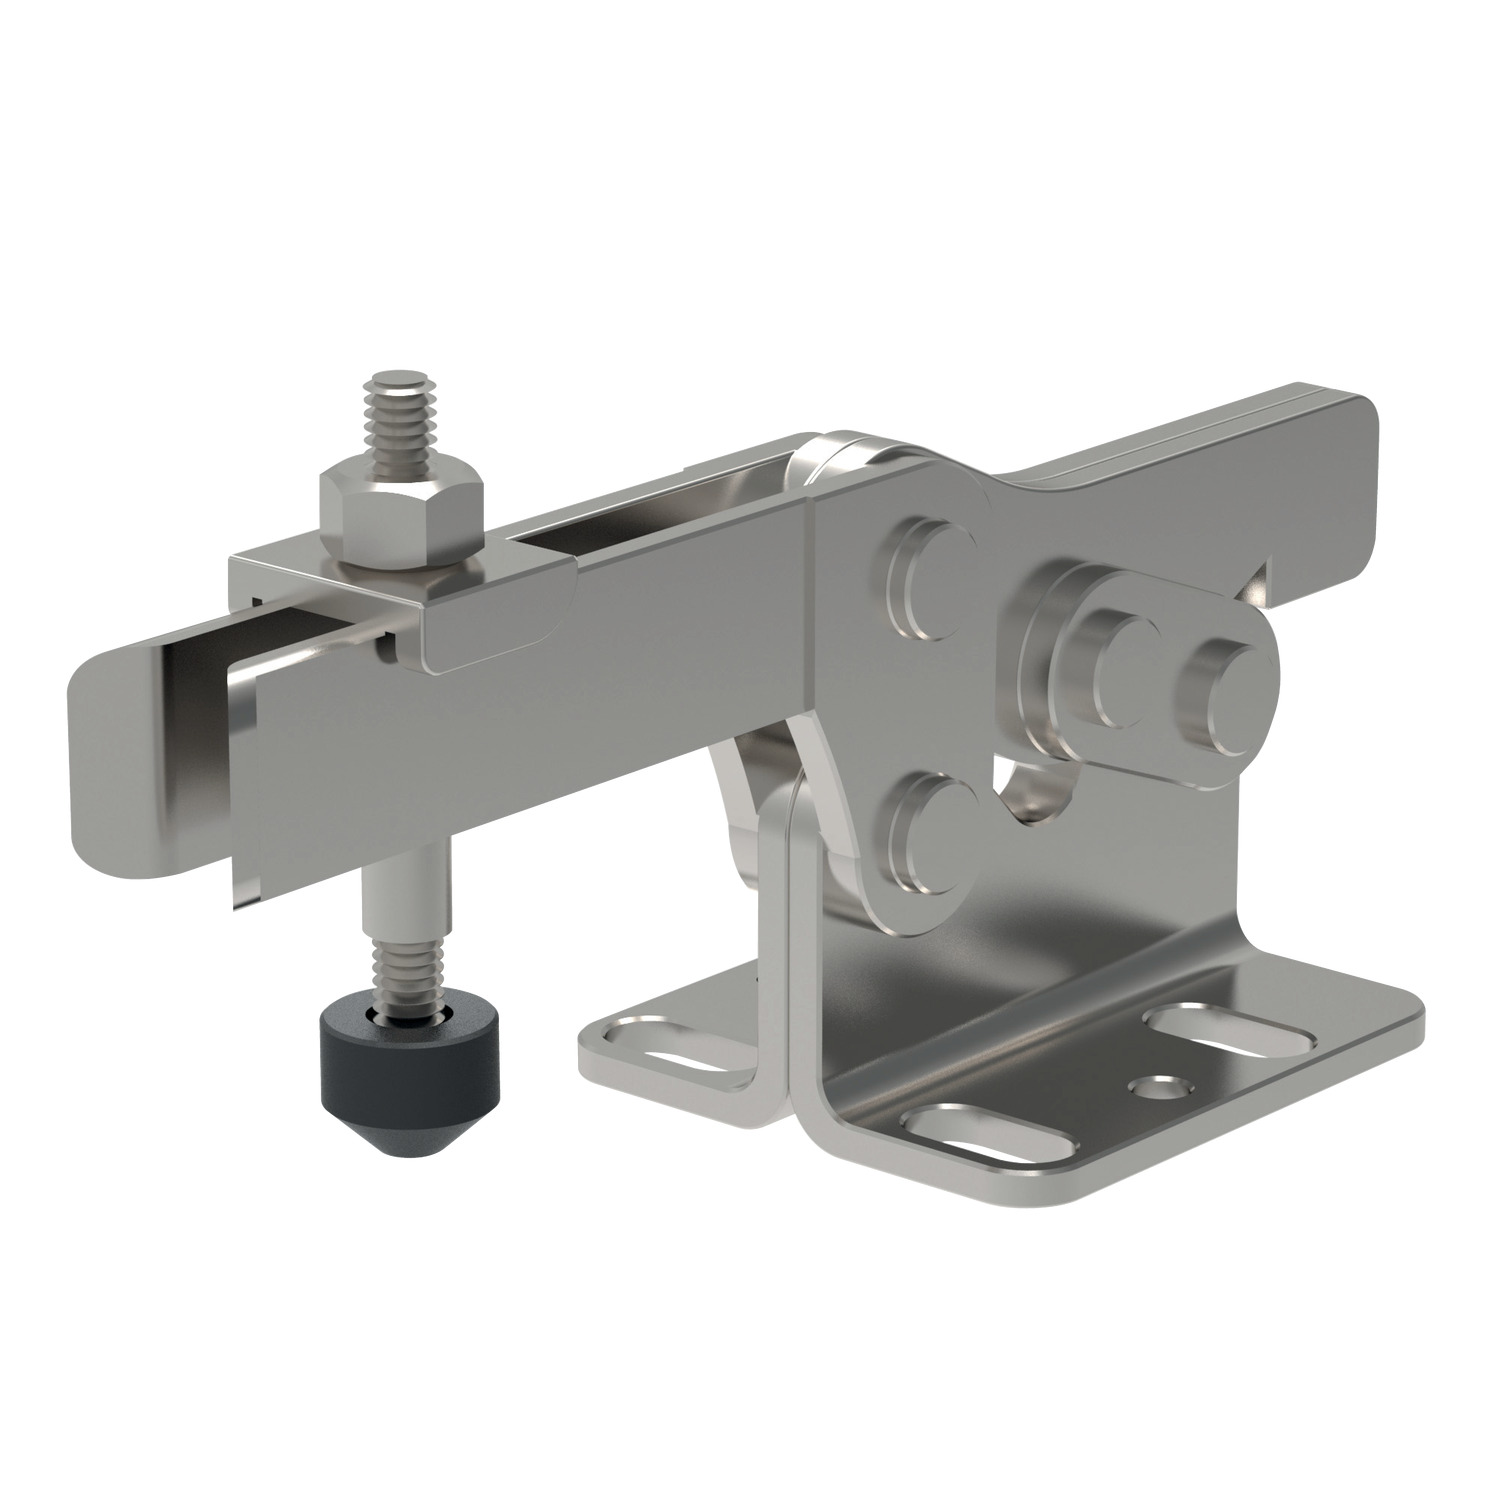 Product 41005.1, Horizontal Acting Toggle Clamps for removable handle / 